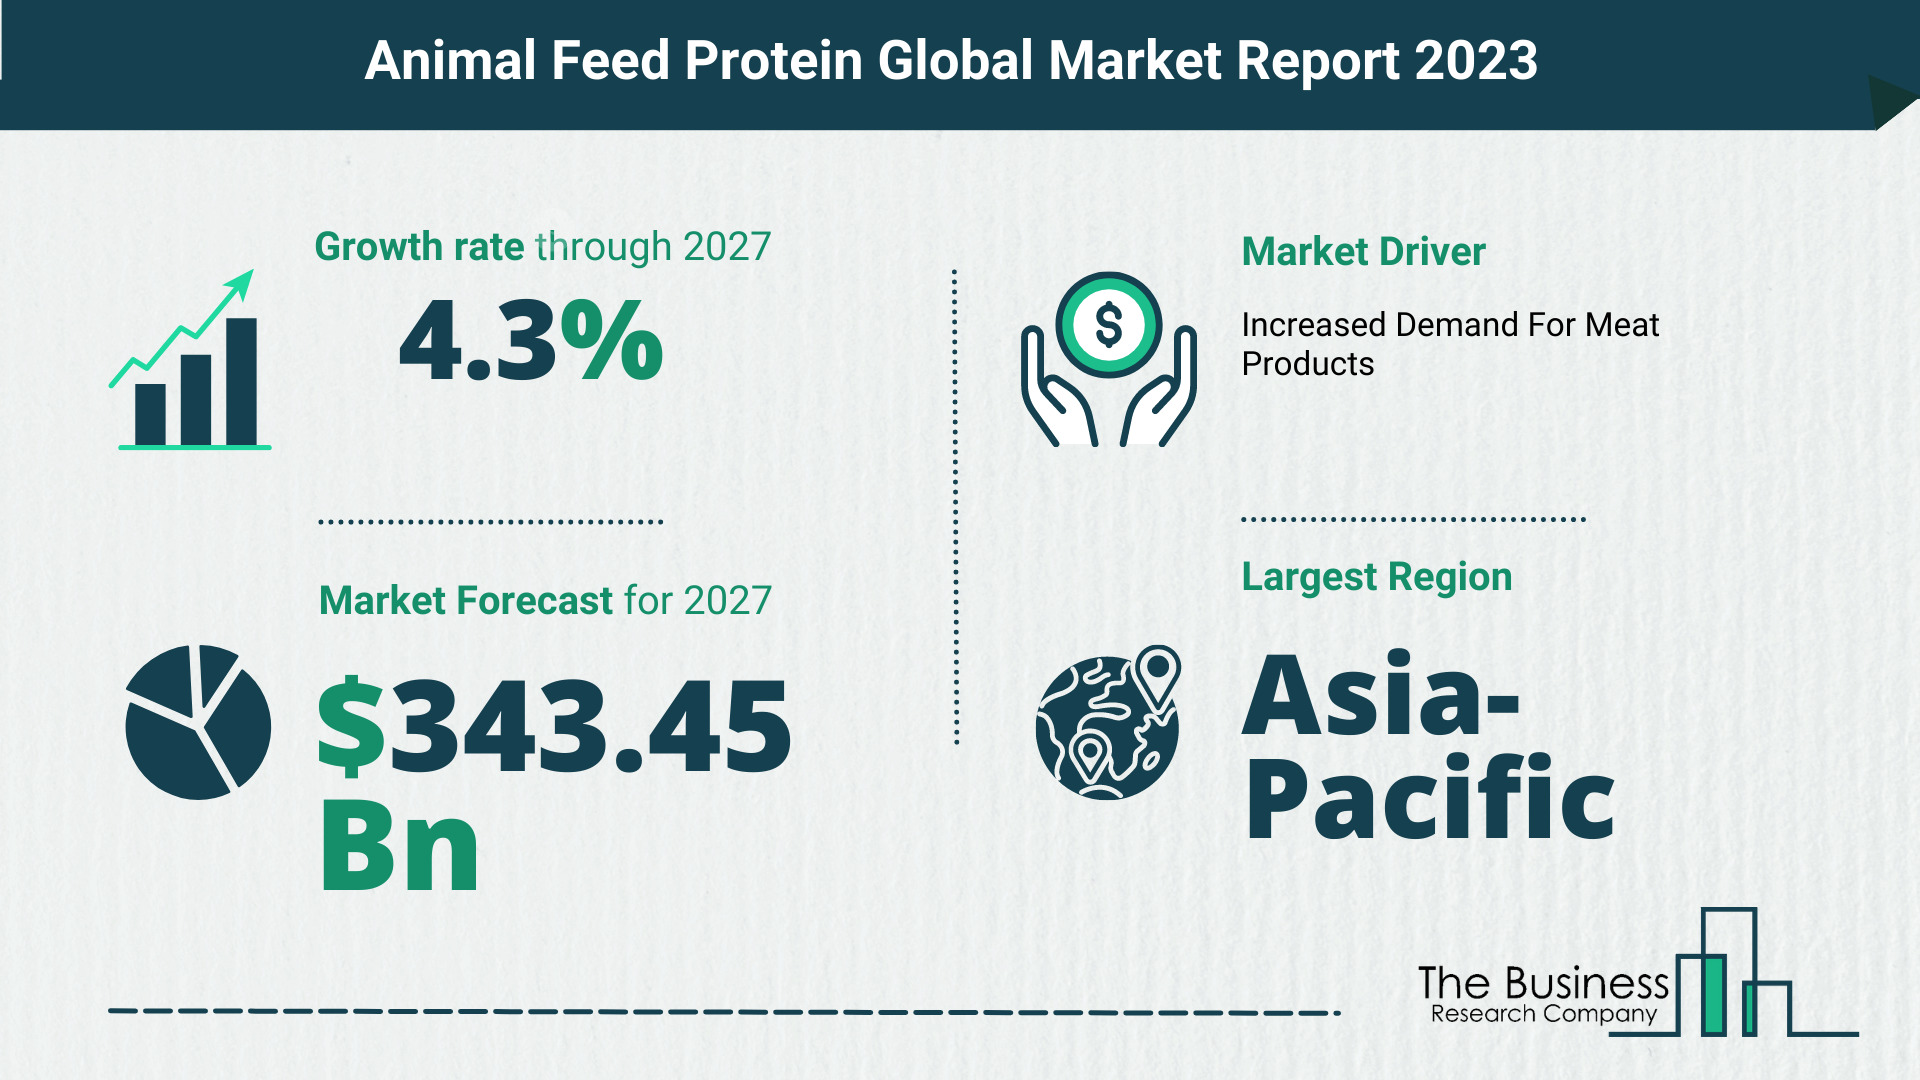 Global Animal Feed Protein Market